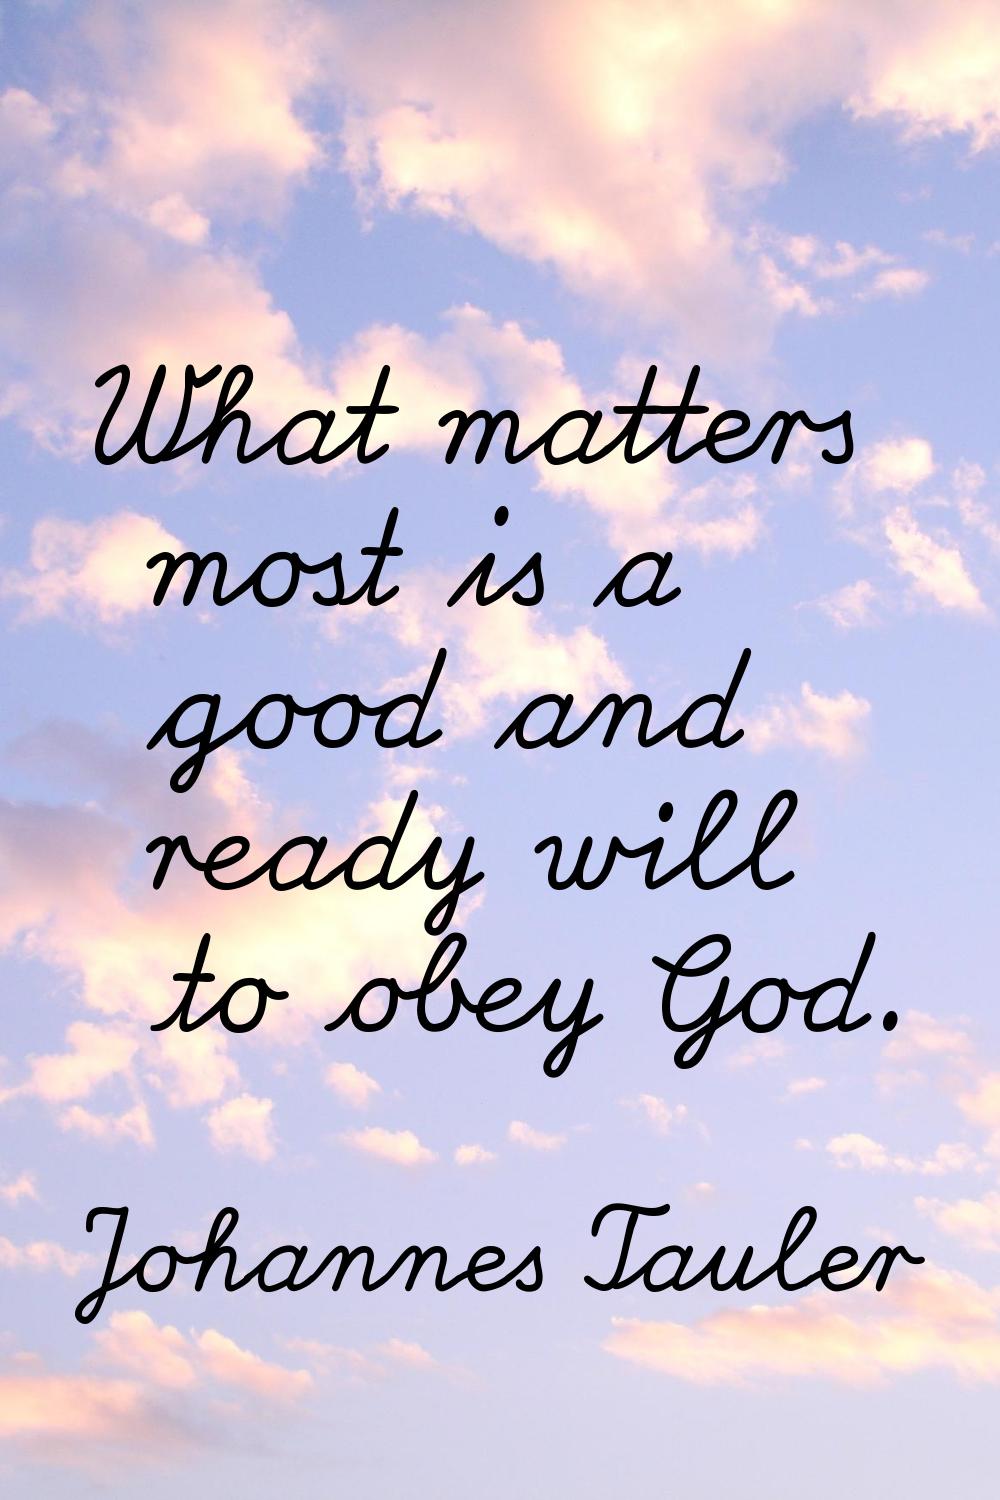 What matters most is a good and ready will to obey God.